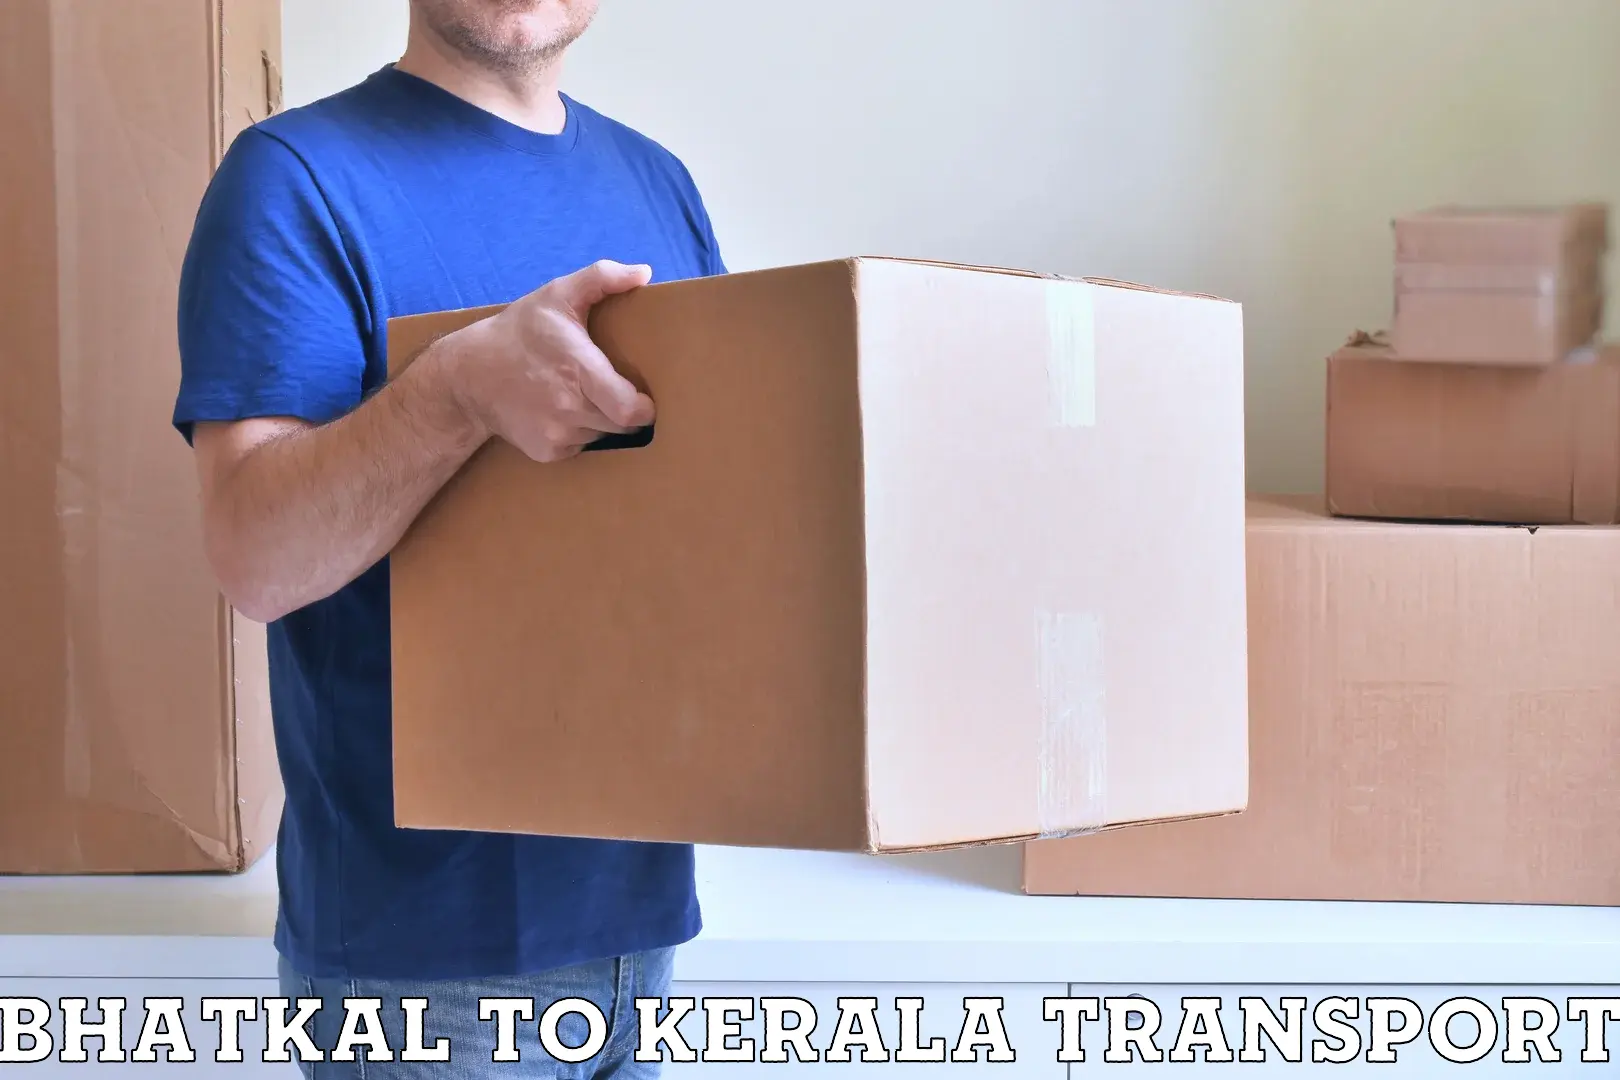 Pick up transport service in Bhatkal to Nochad